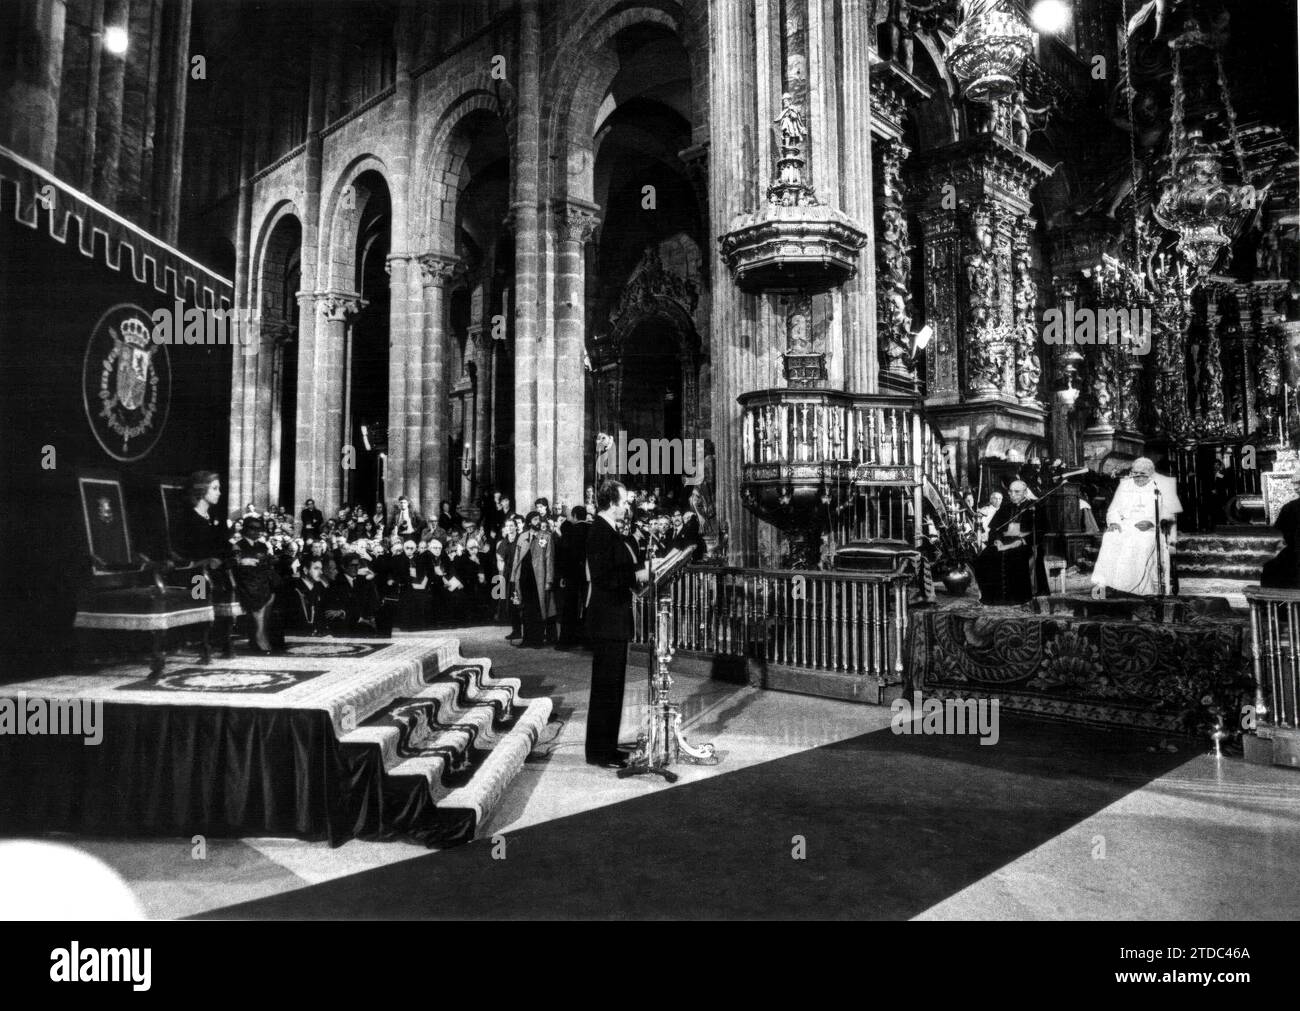 Santiago de Compostela, 11/9/1982. In the Cathedral of the Apostle, European act. John Paul II spoke of the Christian roots of Europe and its necessary spiritual and human renewal. In the image, King Juan Carlos I during his speech. Credit: Album / Archivo ABC Stock Photo